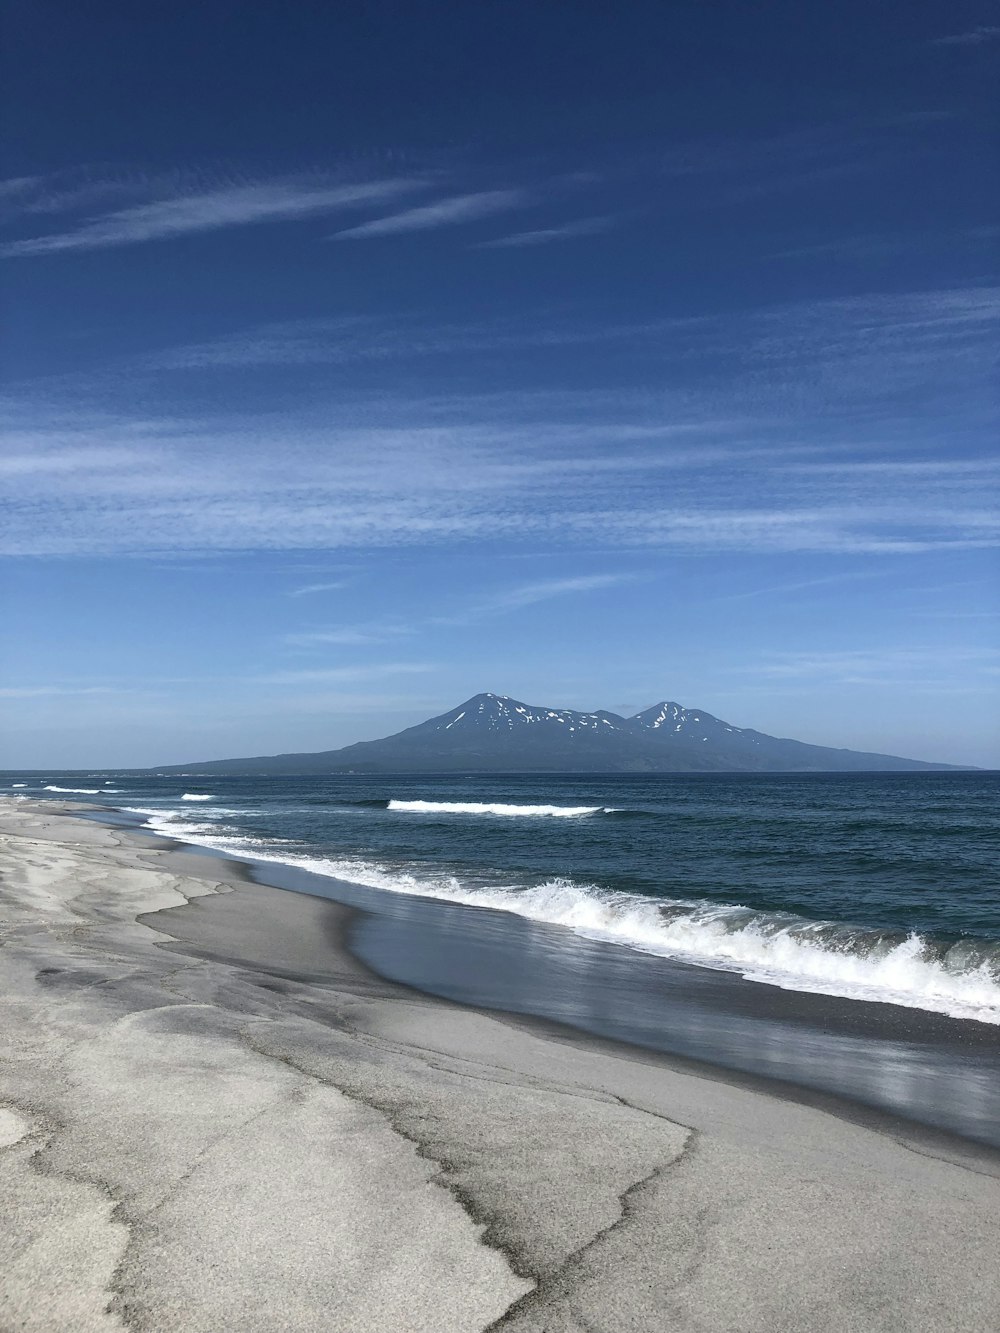 a view of a beach with a mountain in the distance